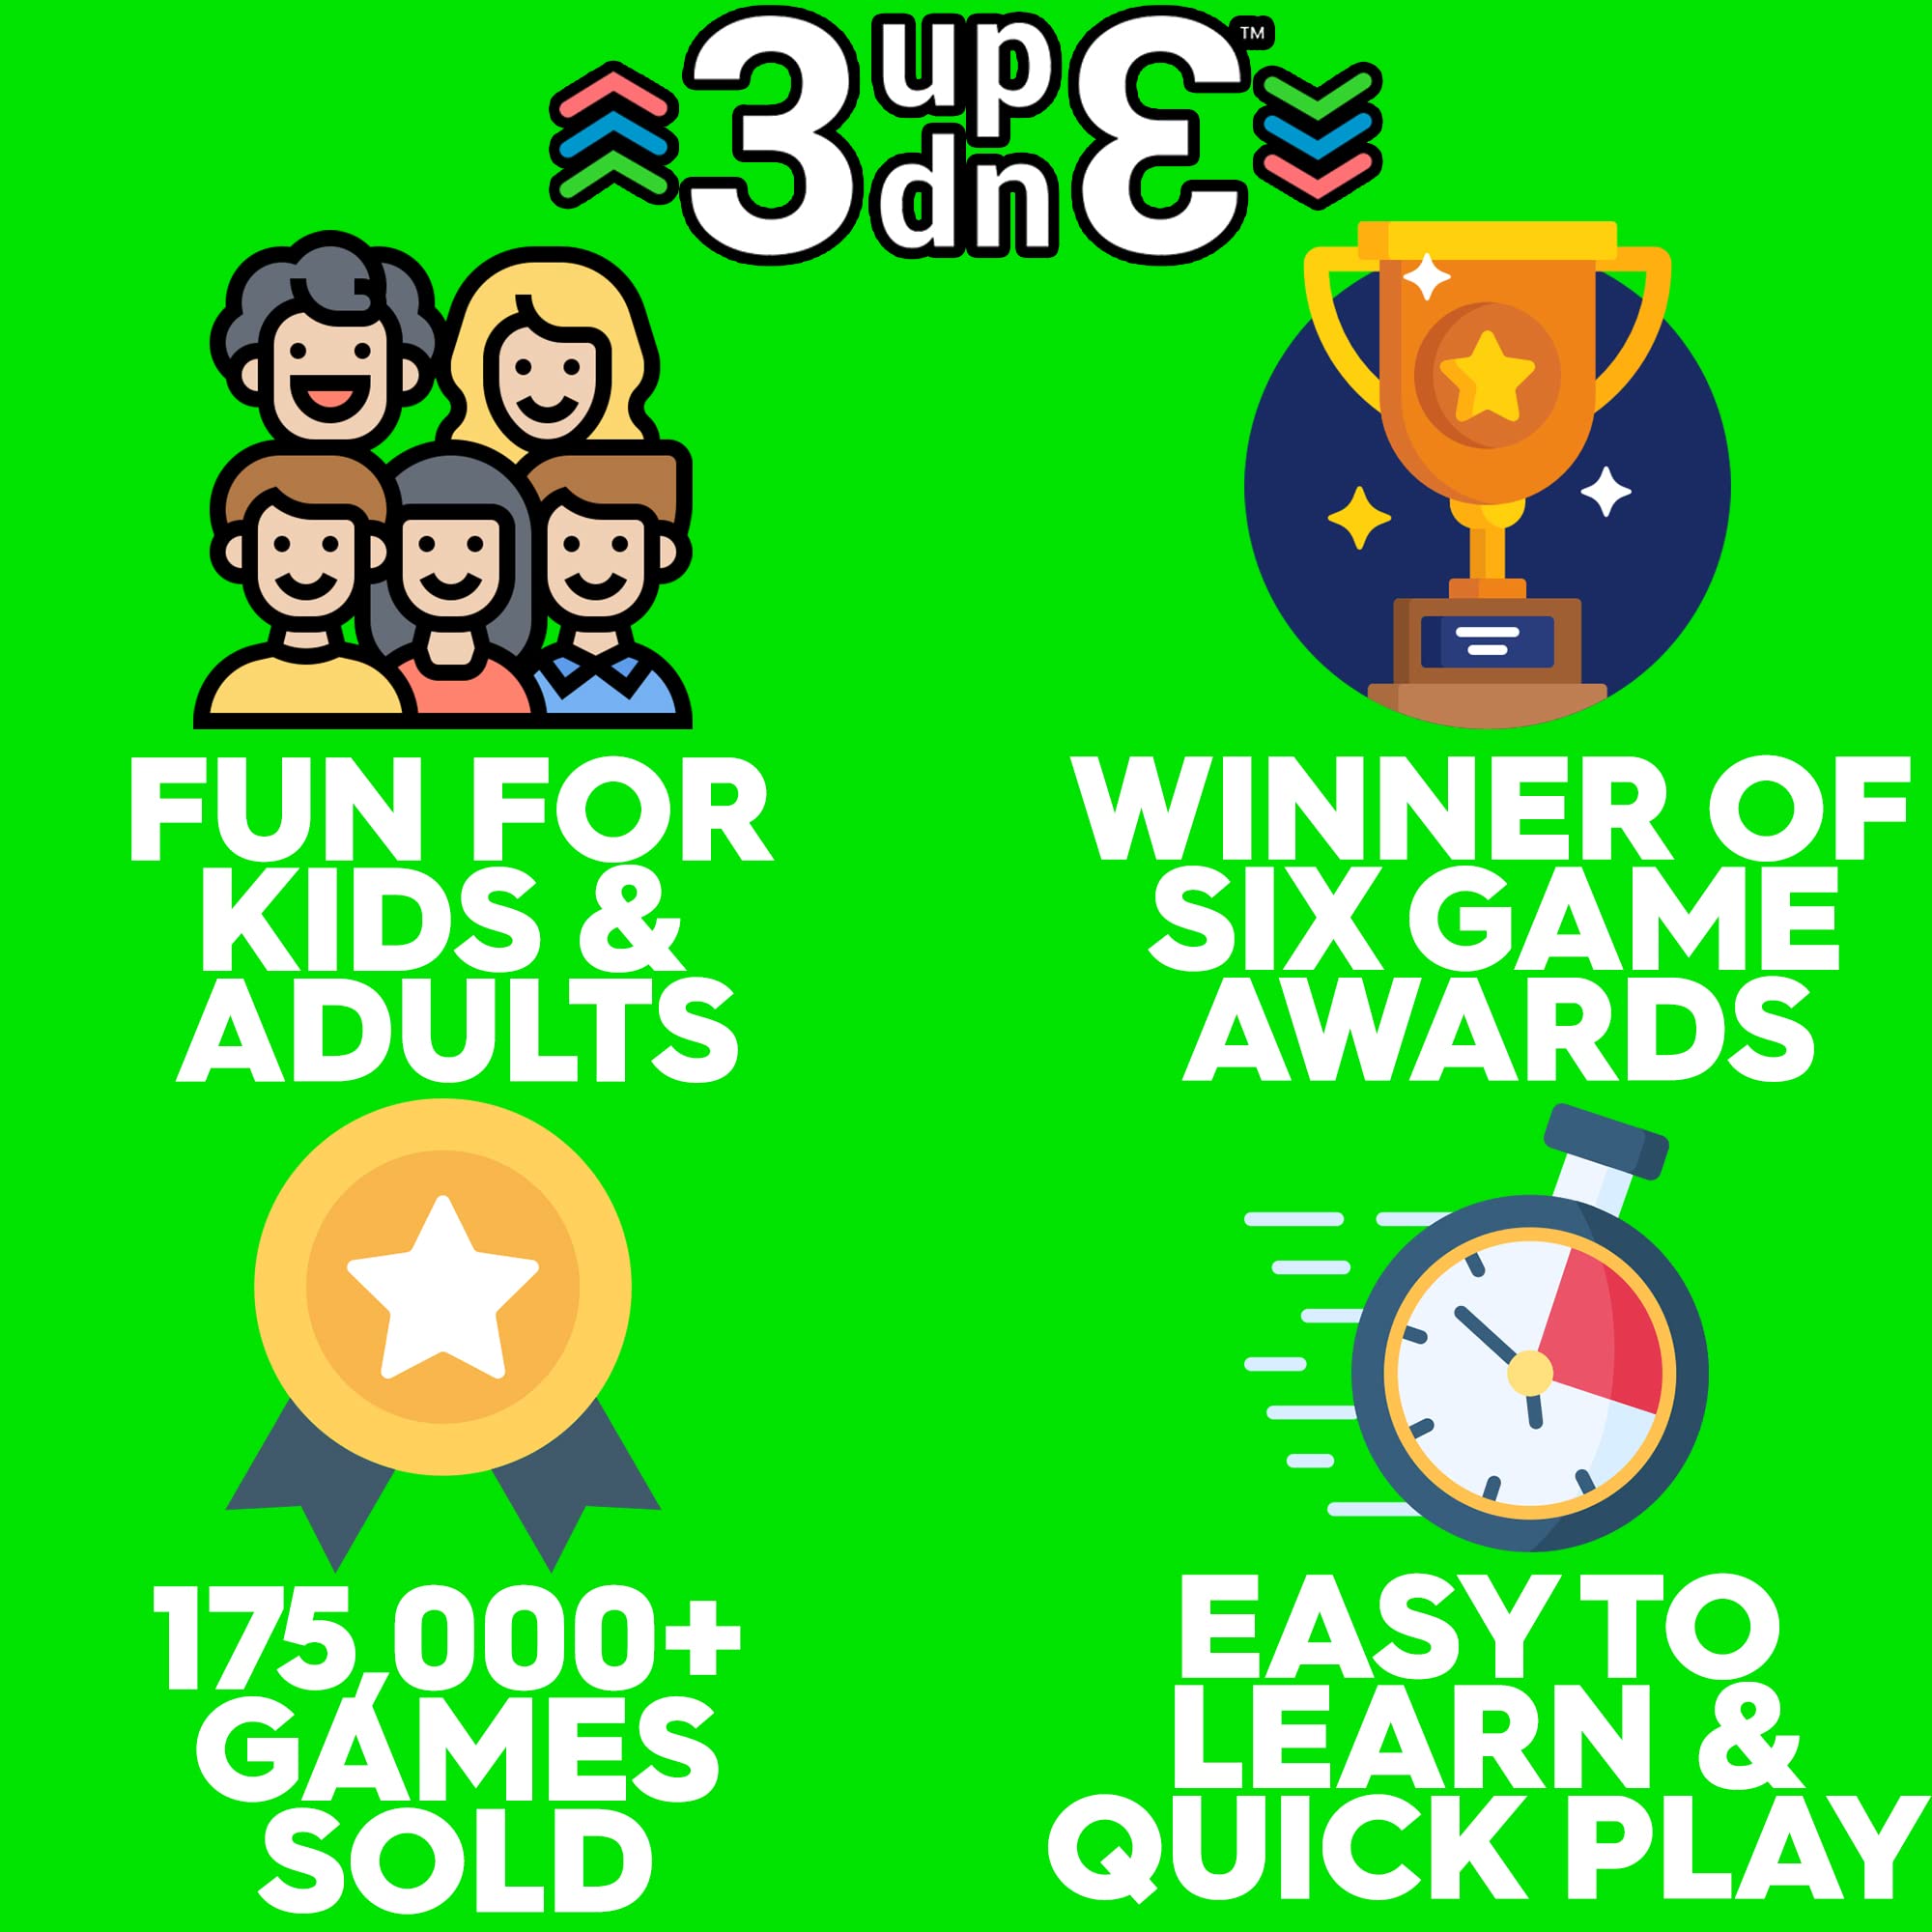 3 Up 3 Down Card Game - Super Fun for Family Games Night Stocking Stuffer - Award Winning 2 Player Games - Up to 6 Players - Fast & Easy to Learn - Ages 7 to 100 - OK 2 Win